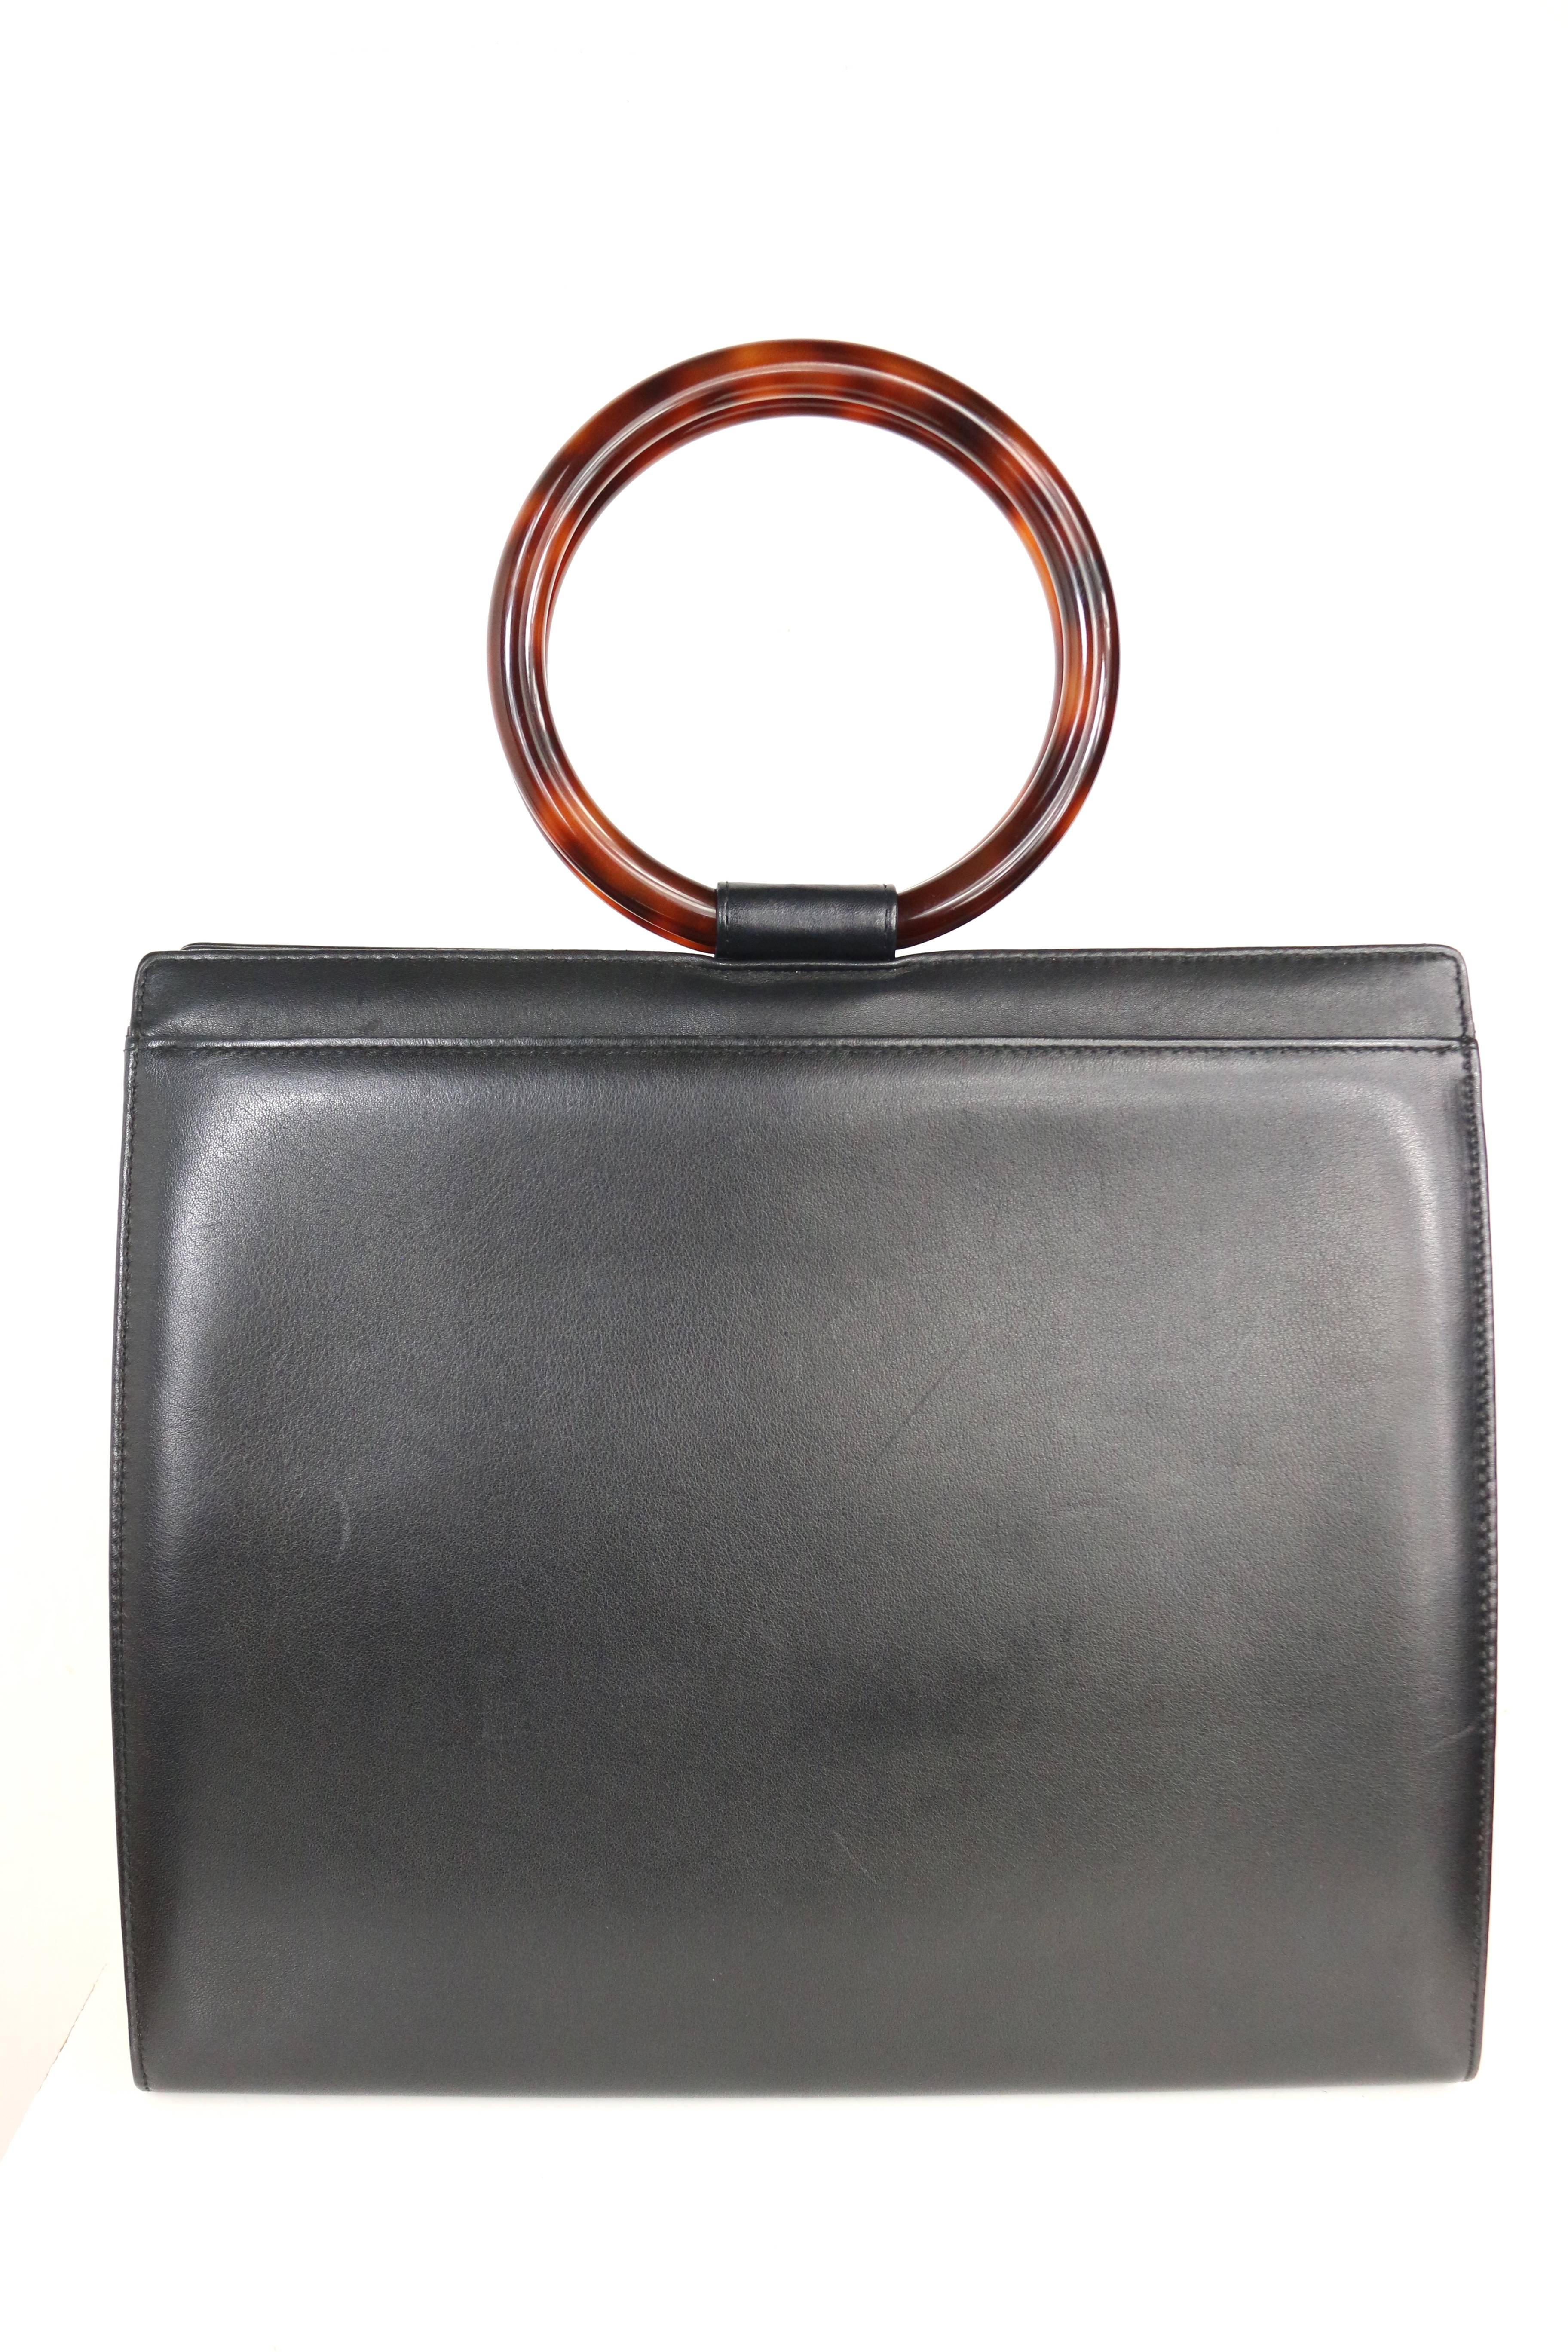 - Vintage 90s Chanel black leather with round shape tortoiseshell handle handbag. A very 60s retro style bag. 

- Featuring double tortoiseshell handles, one interior leather zipper pocket, and one interior slip pocket. 

- Made in Italy.   

-